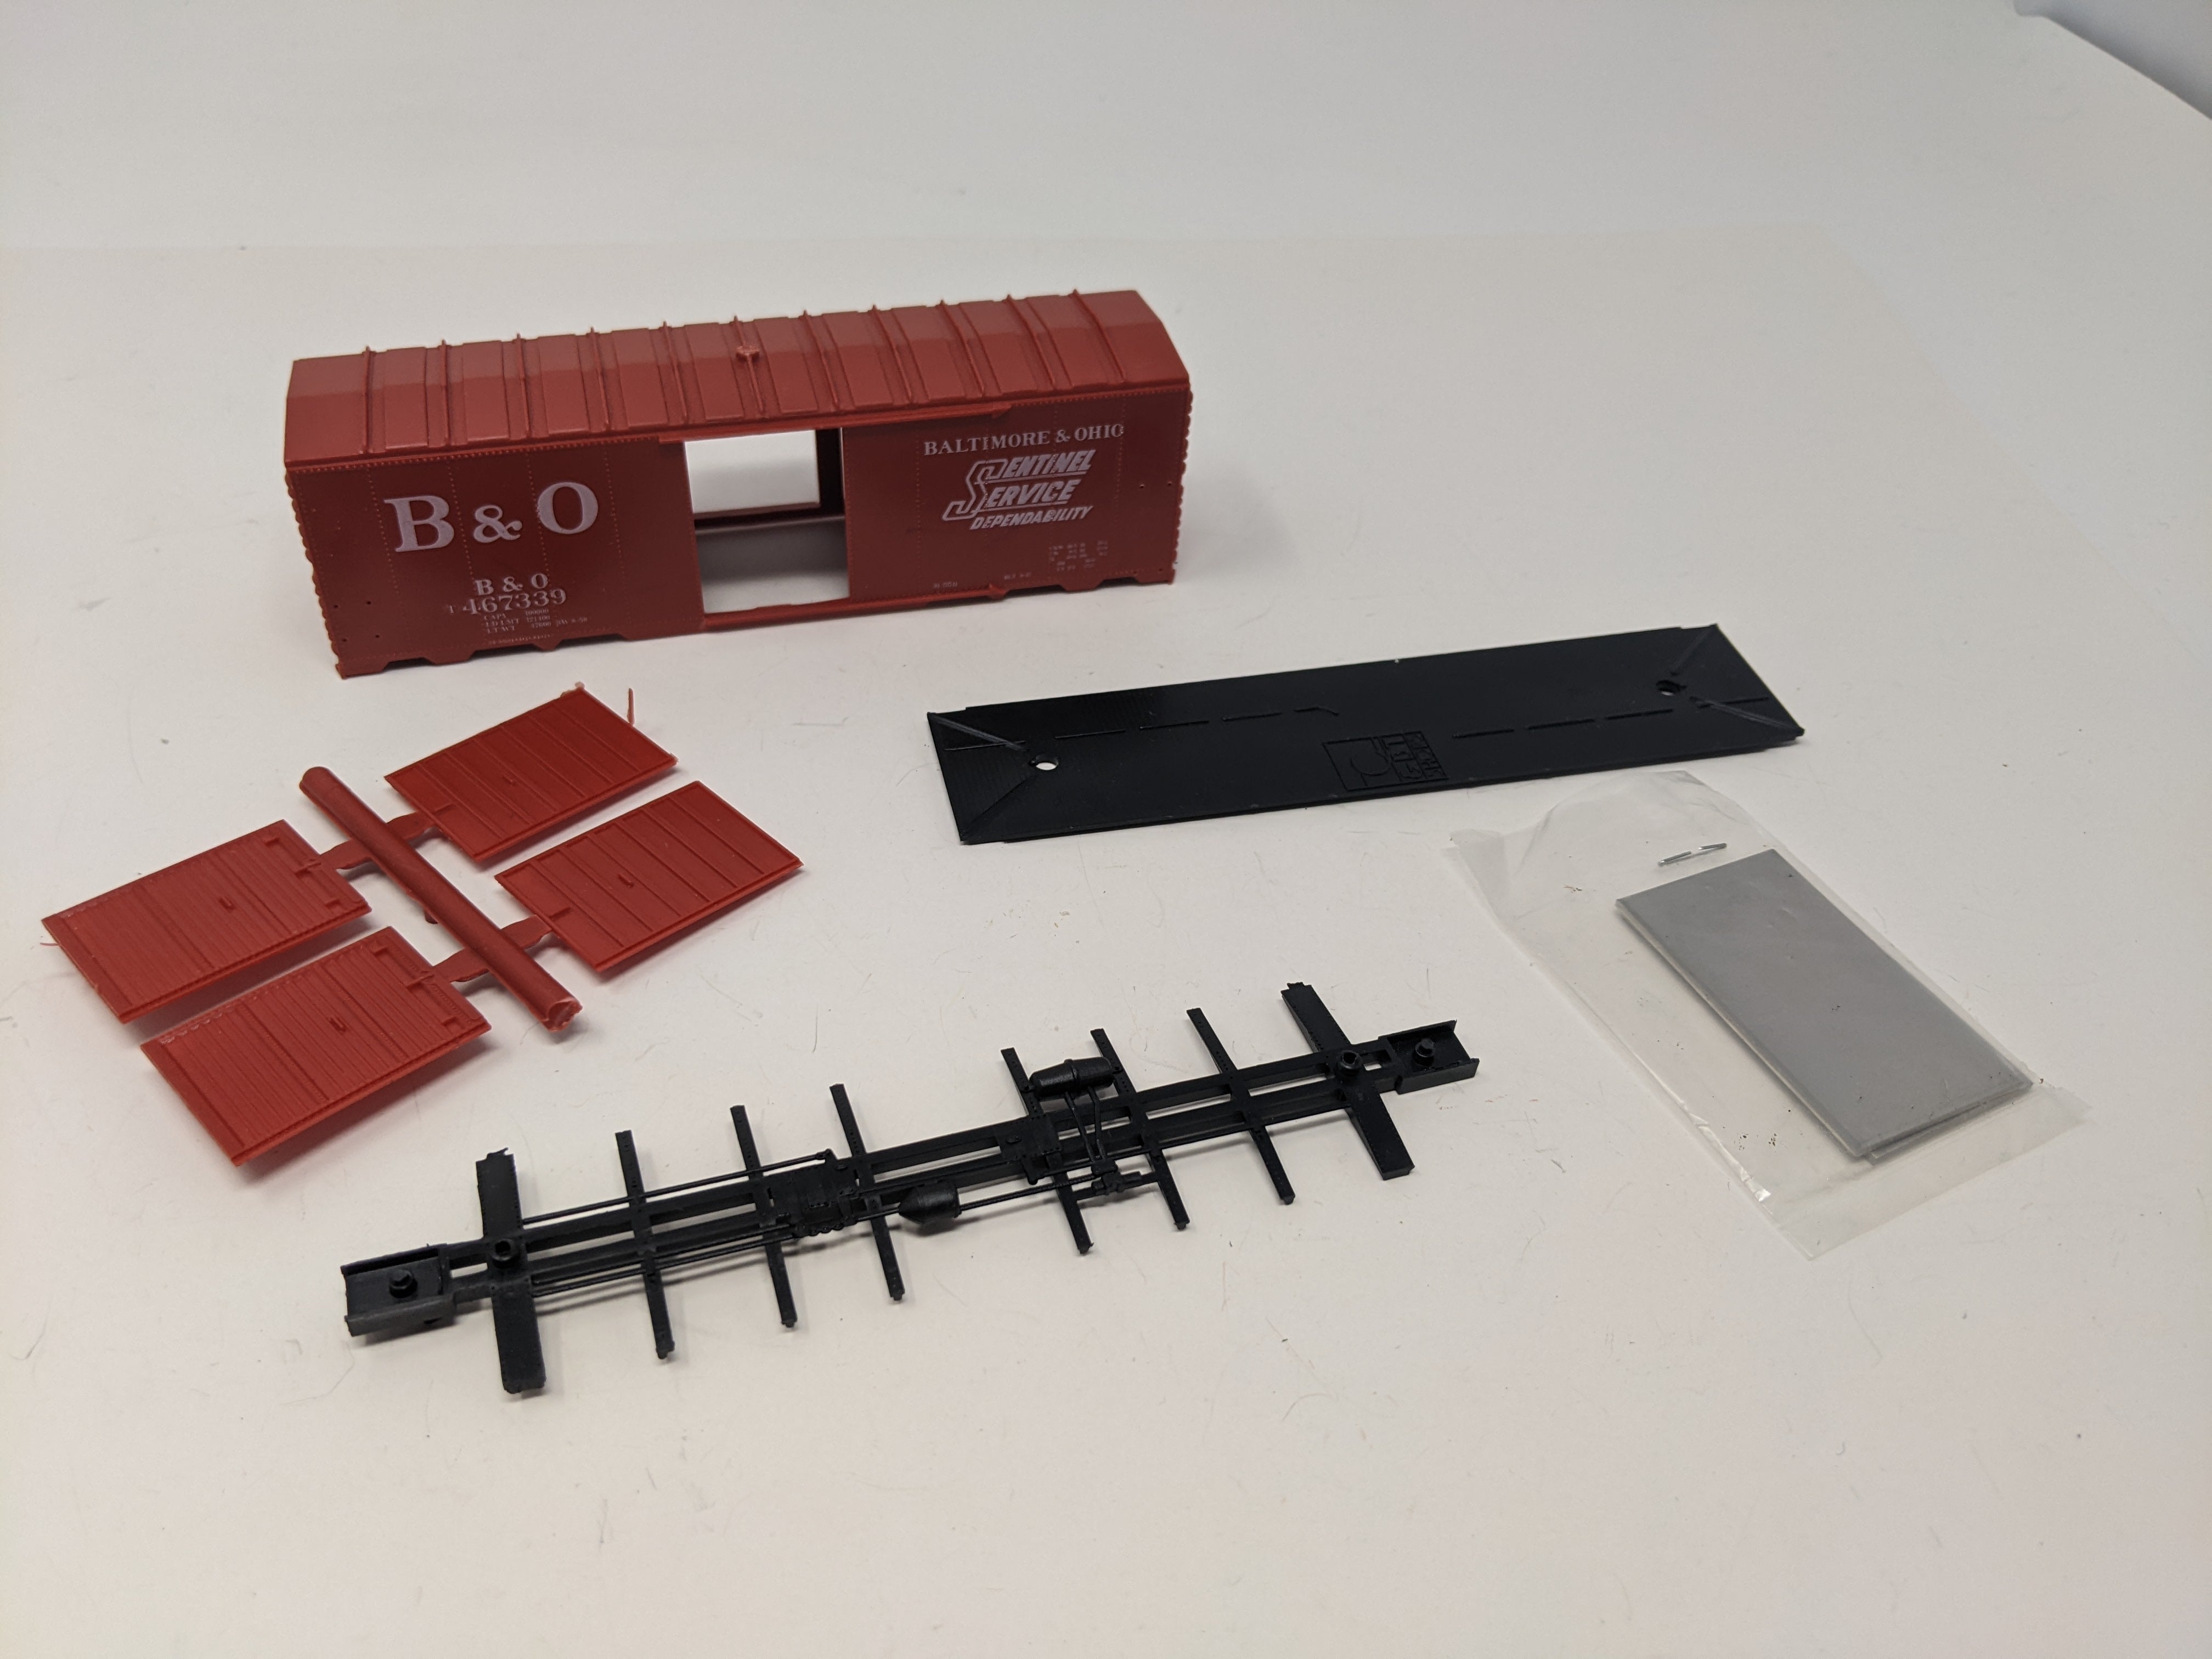 USED C&BT SHOPS HO Scale, 40' Box Car (incomplete), Baltimore and Ohio BO #467339, Sentinel Service (KIT)